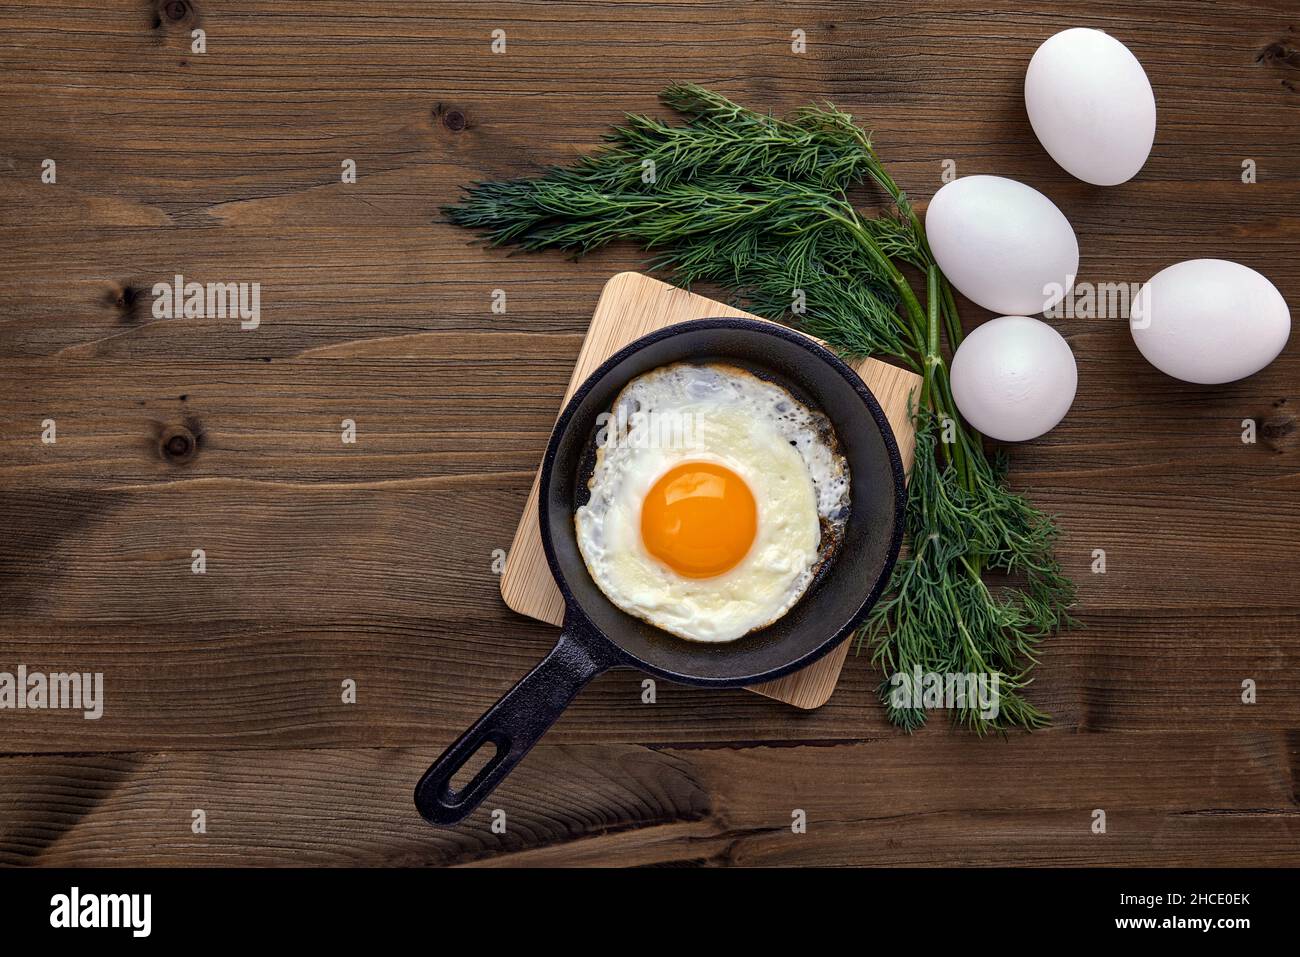 https://c8.alamy.com/comp/2HCE0EK/fried-chicken-egg-in-a-small-frying-pan-with-a-stand-2HCE0EK.jpg